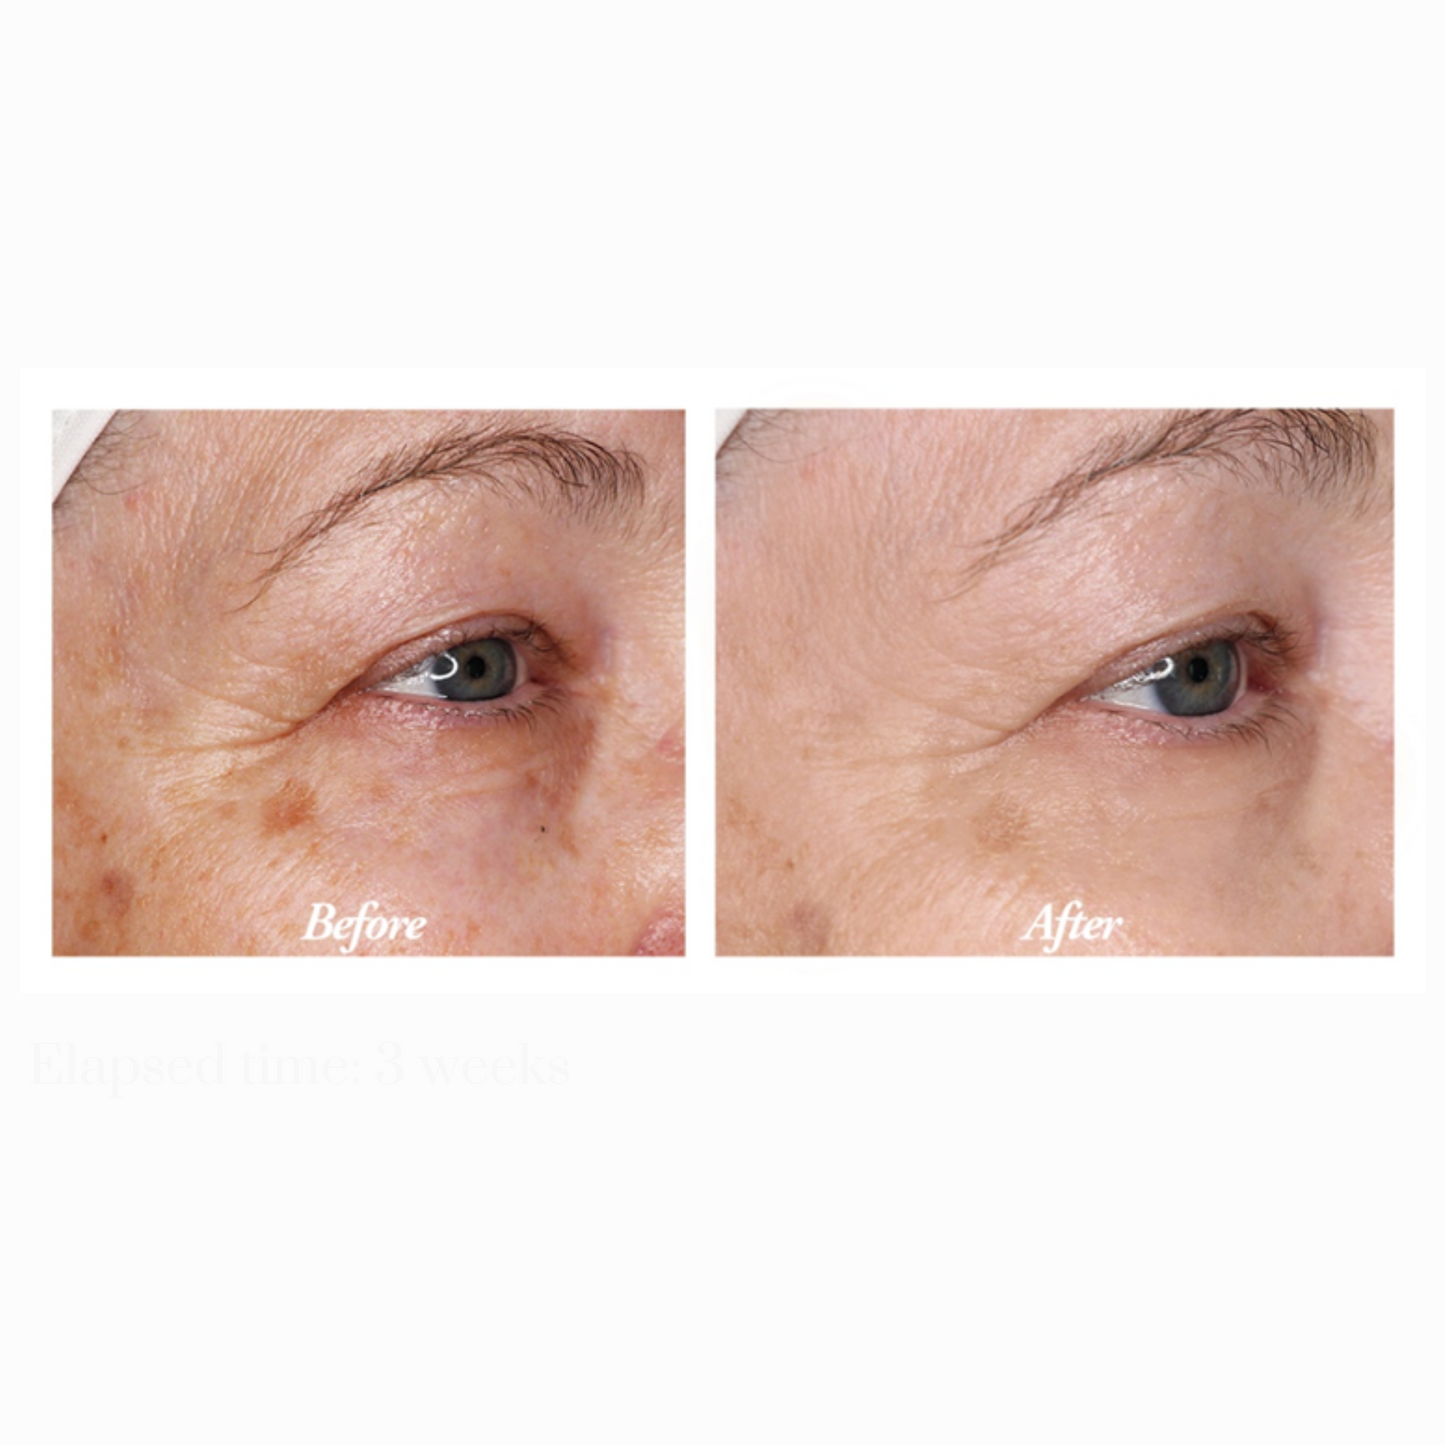 Before & After picture of a woman's eyes with improved fine lines, wrinkles and dark spots